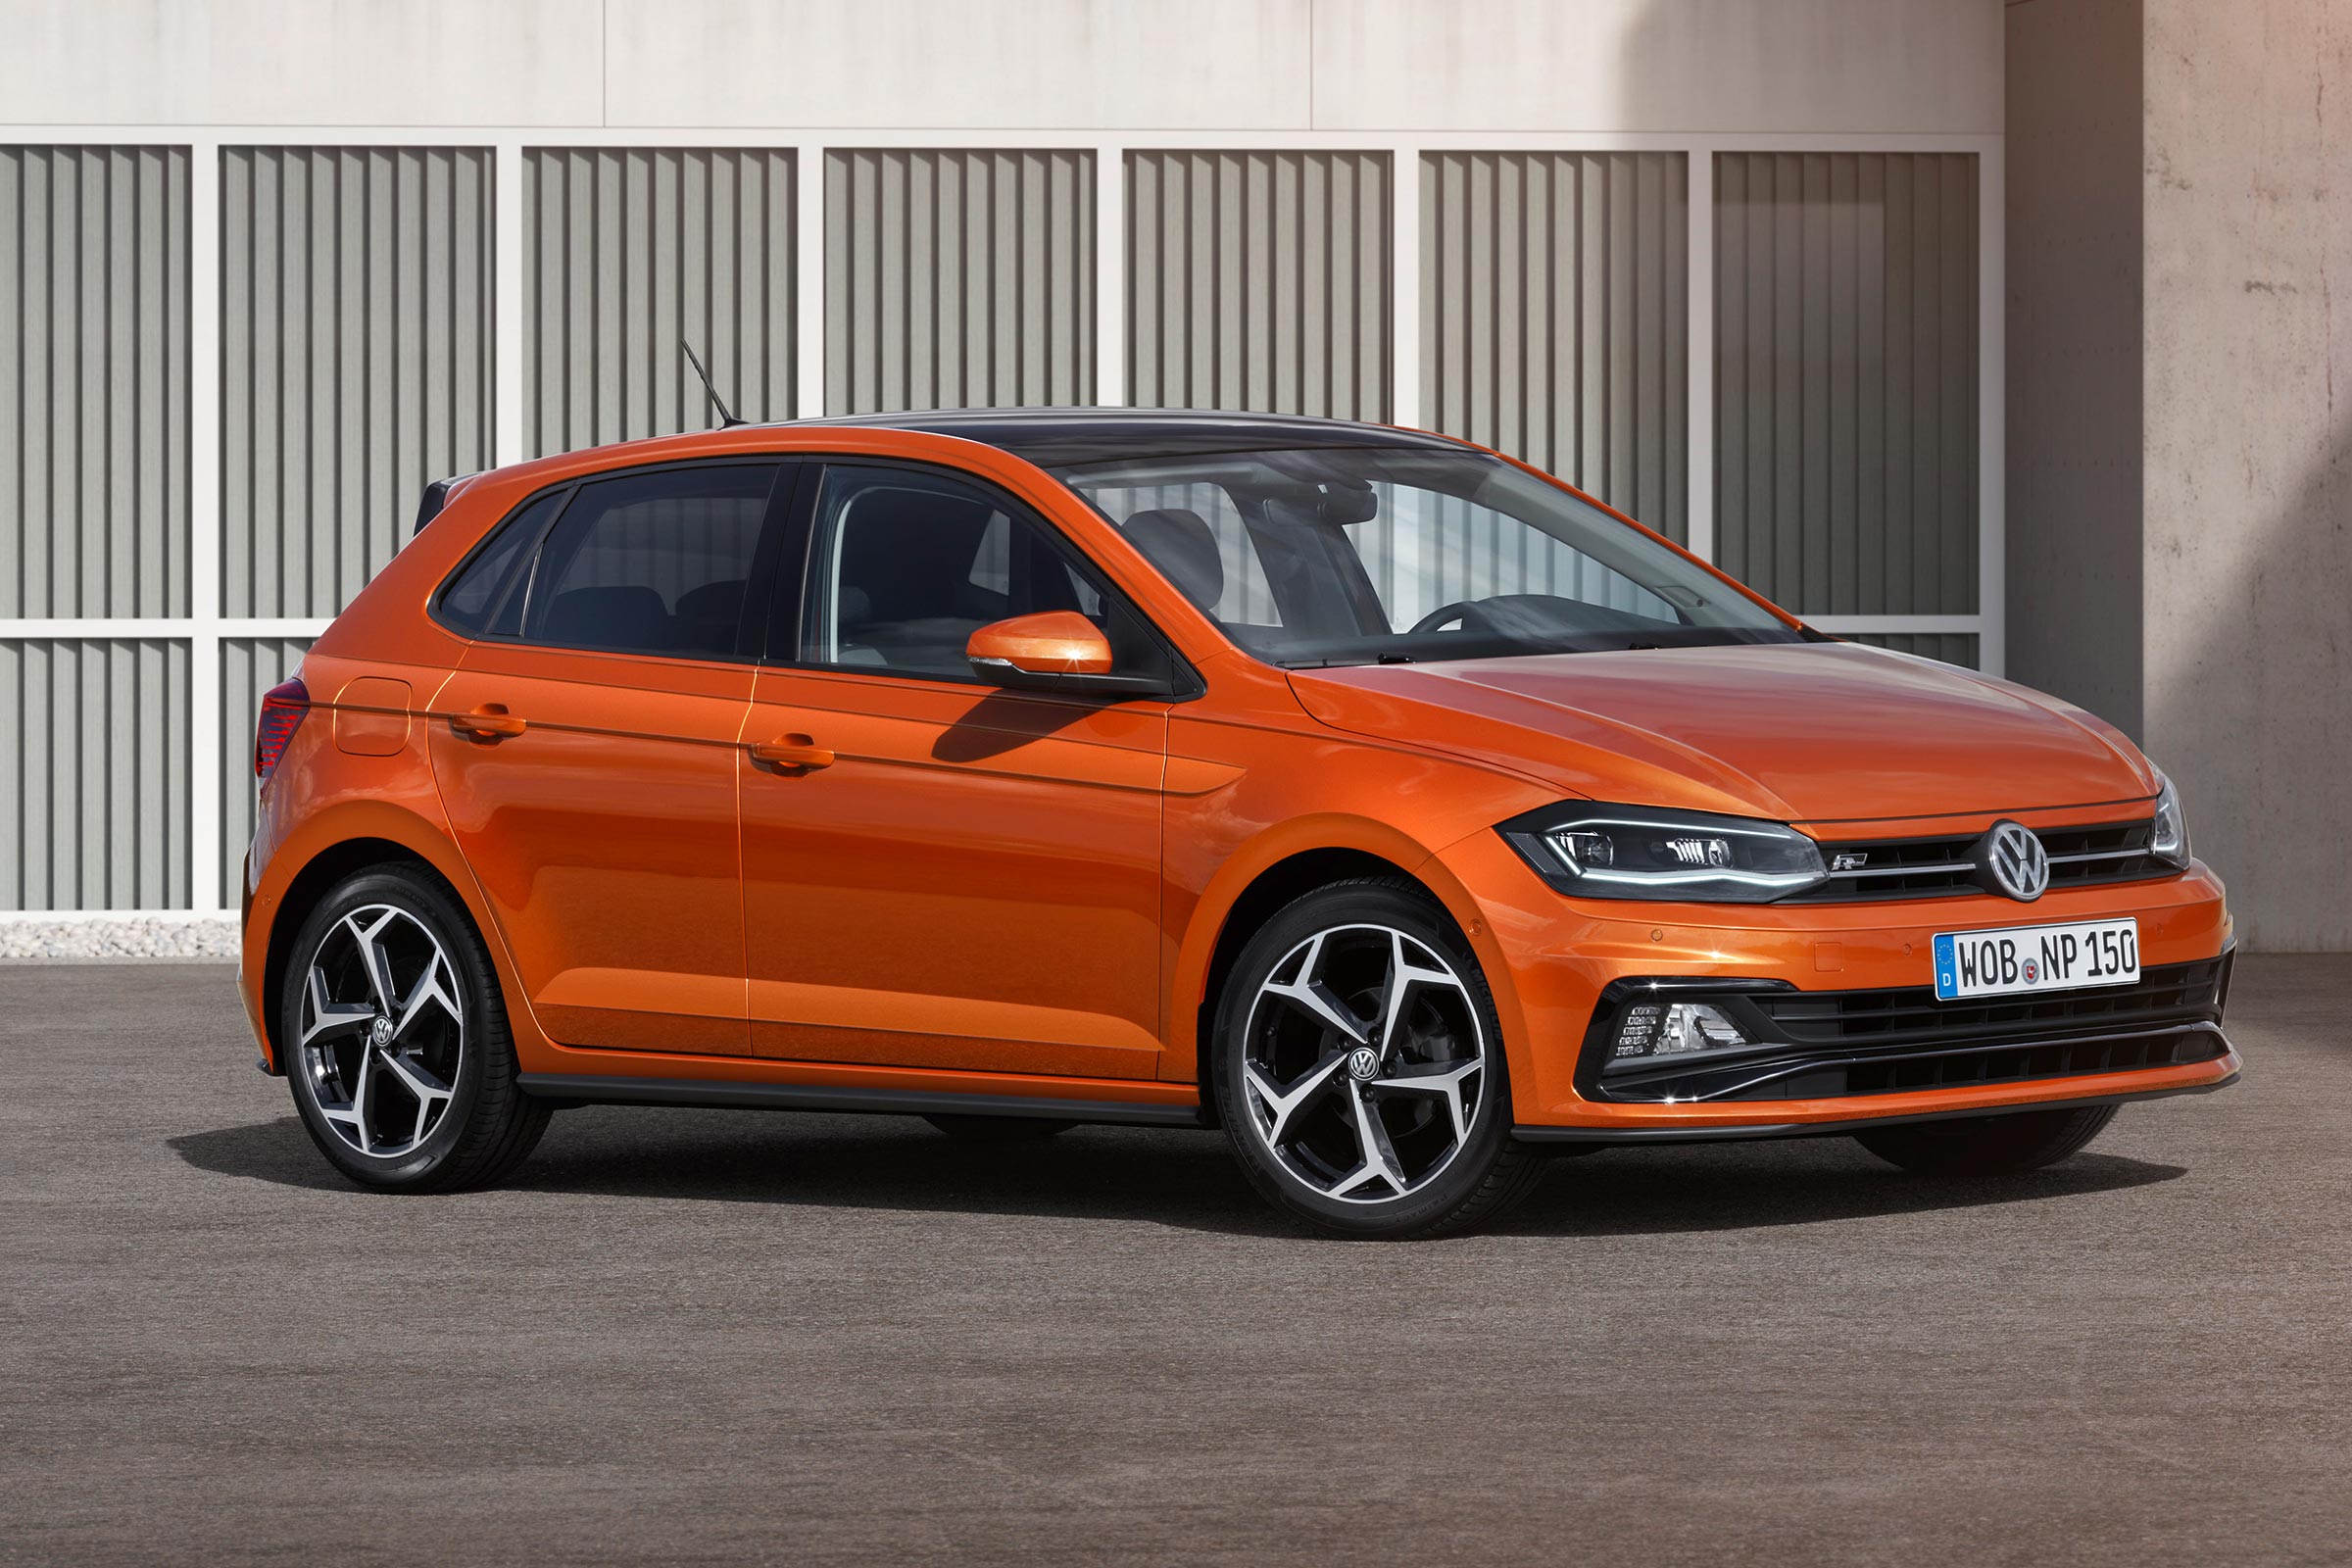 New 2017 Volkswagen Polo prices, specs and release date Carbuyer